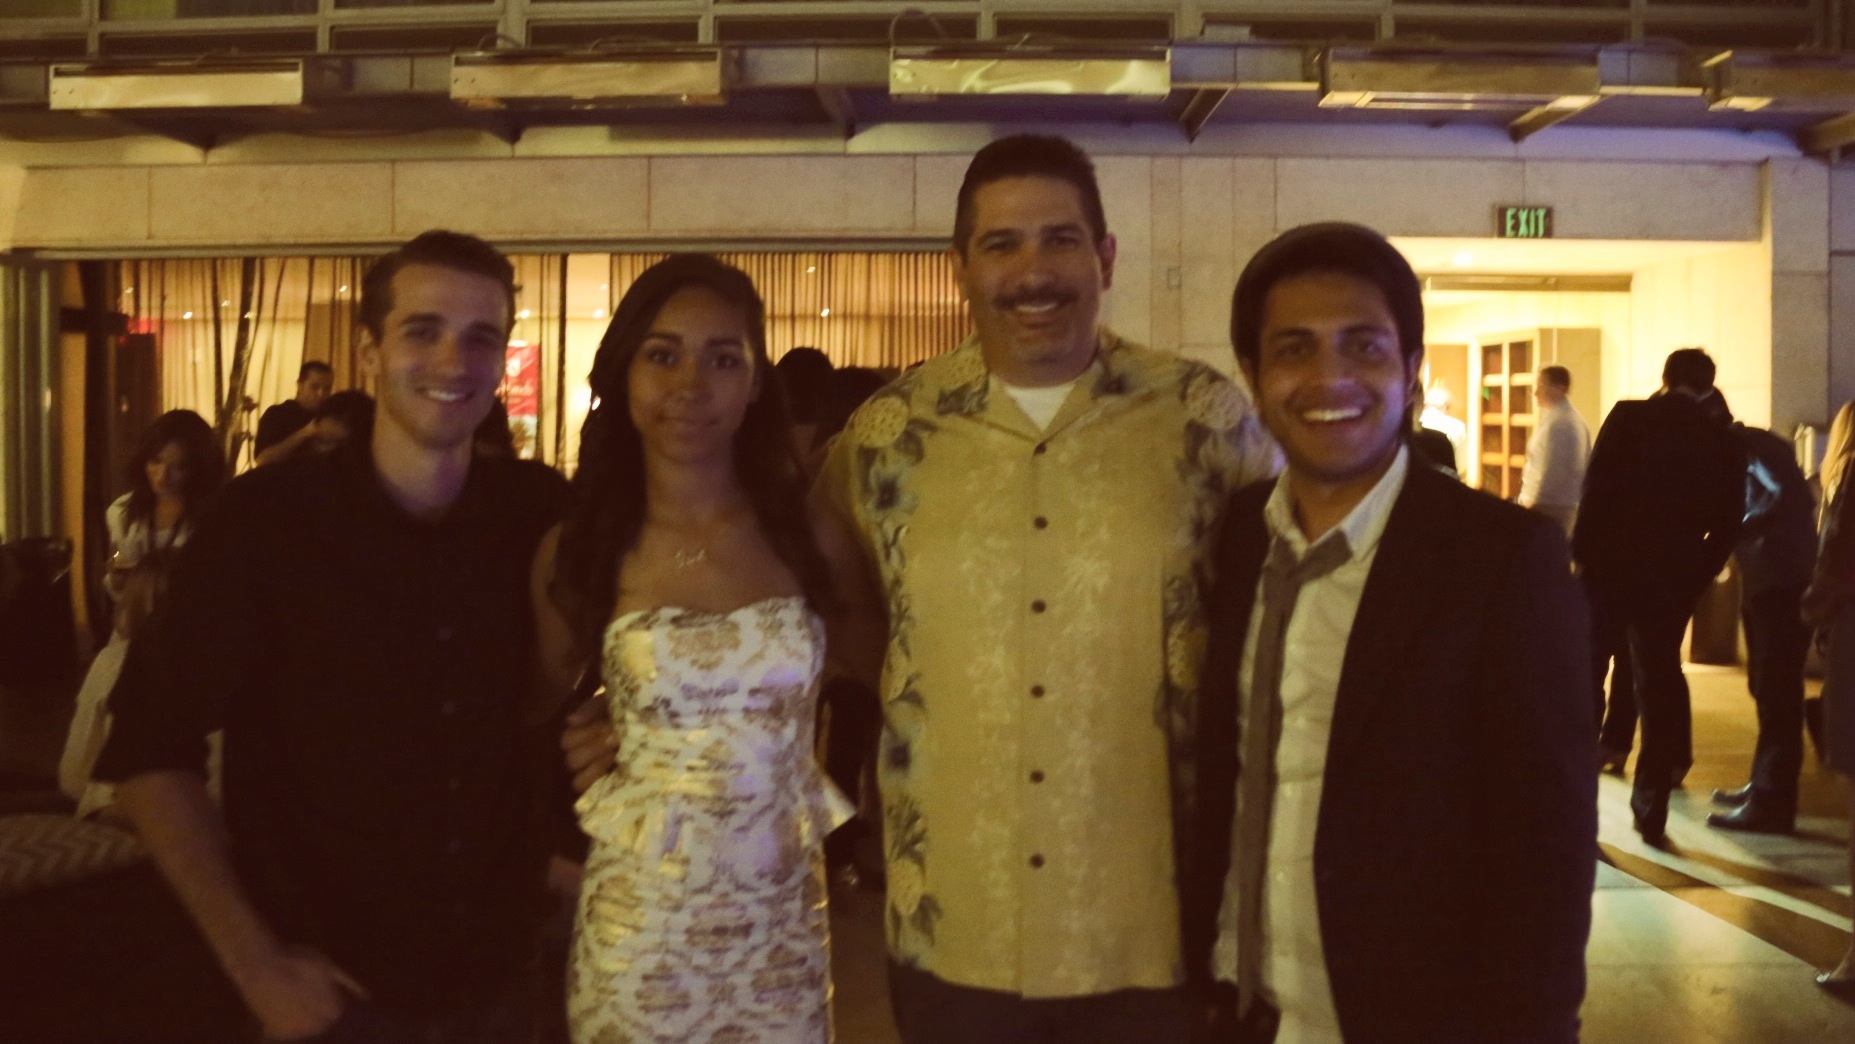 Thomas Haley with Brooklyn Haley, Dan Jagels and Adam Fazel at the Awards party of the SAN DIEGO FILM FESTIVAL